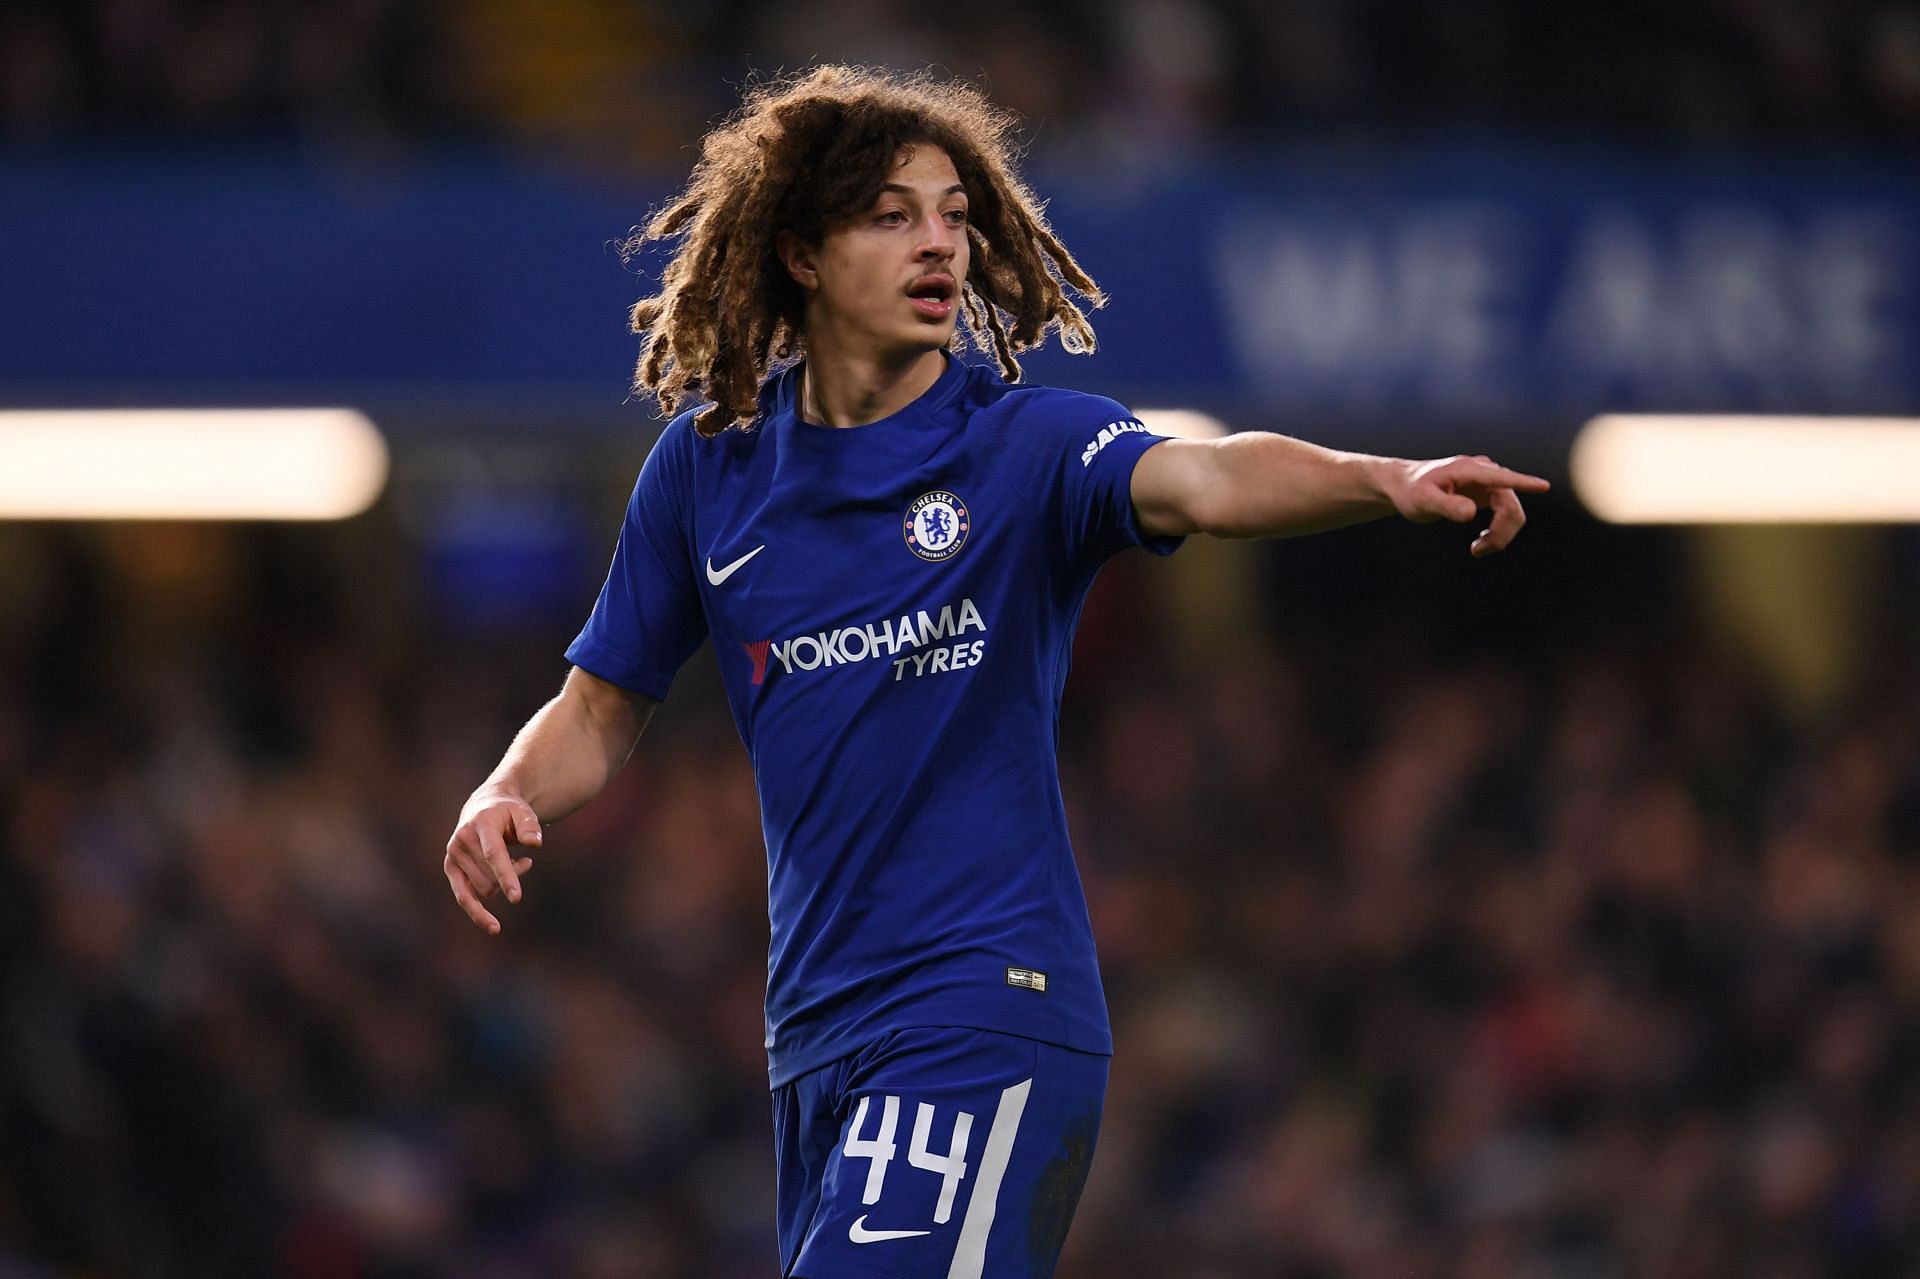 Ethan Ampadu was considered a bright talent, but has failed to make it into Chelsea&#039;s first team.